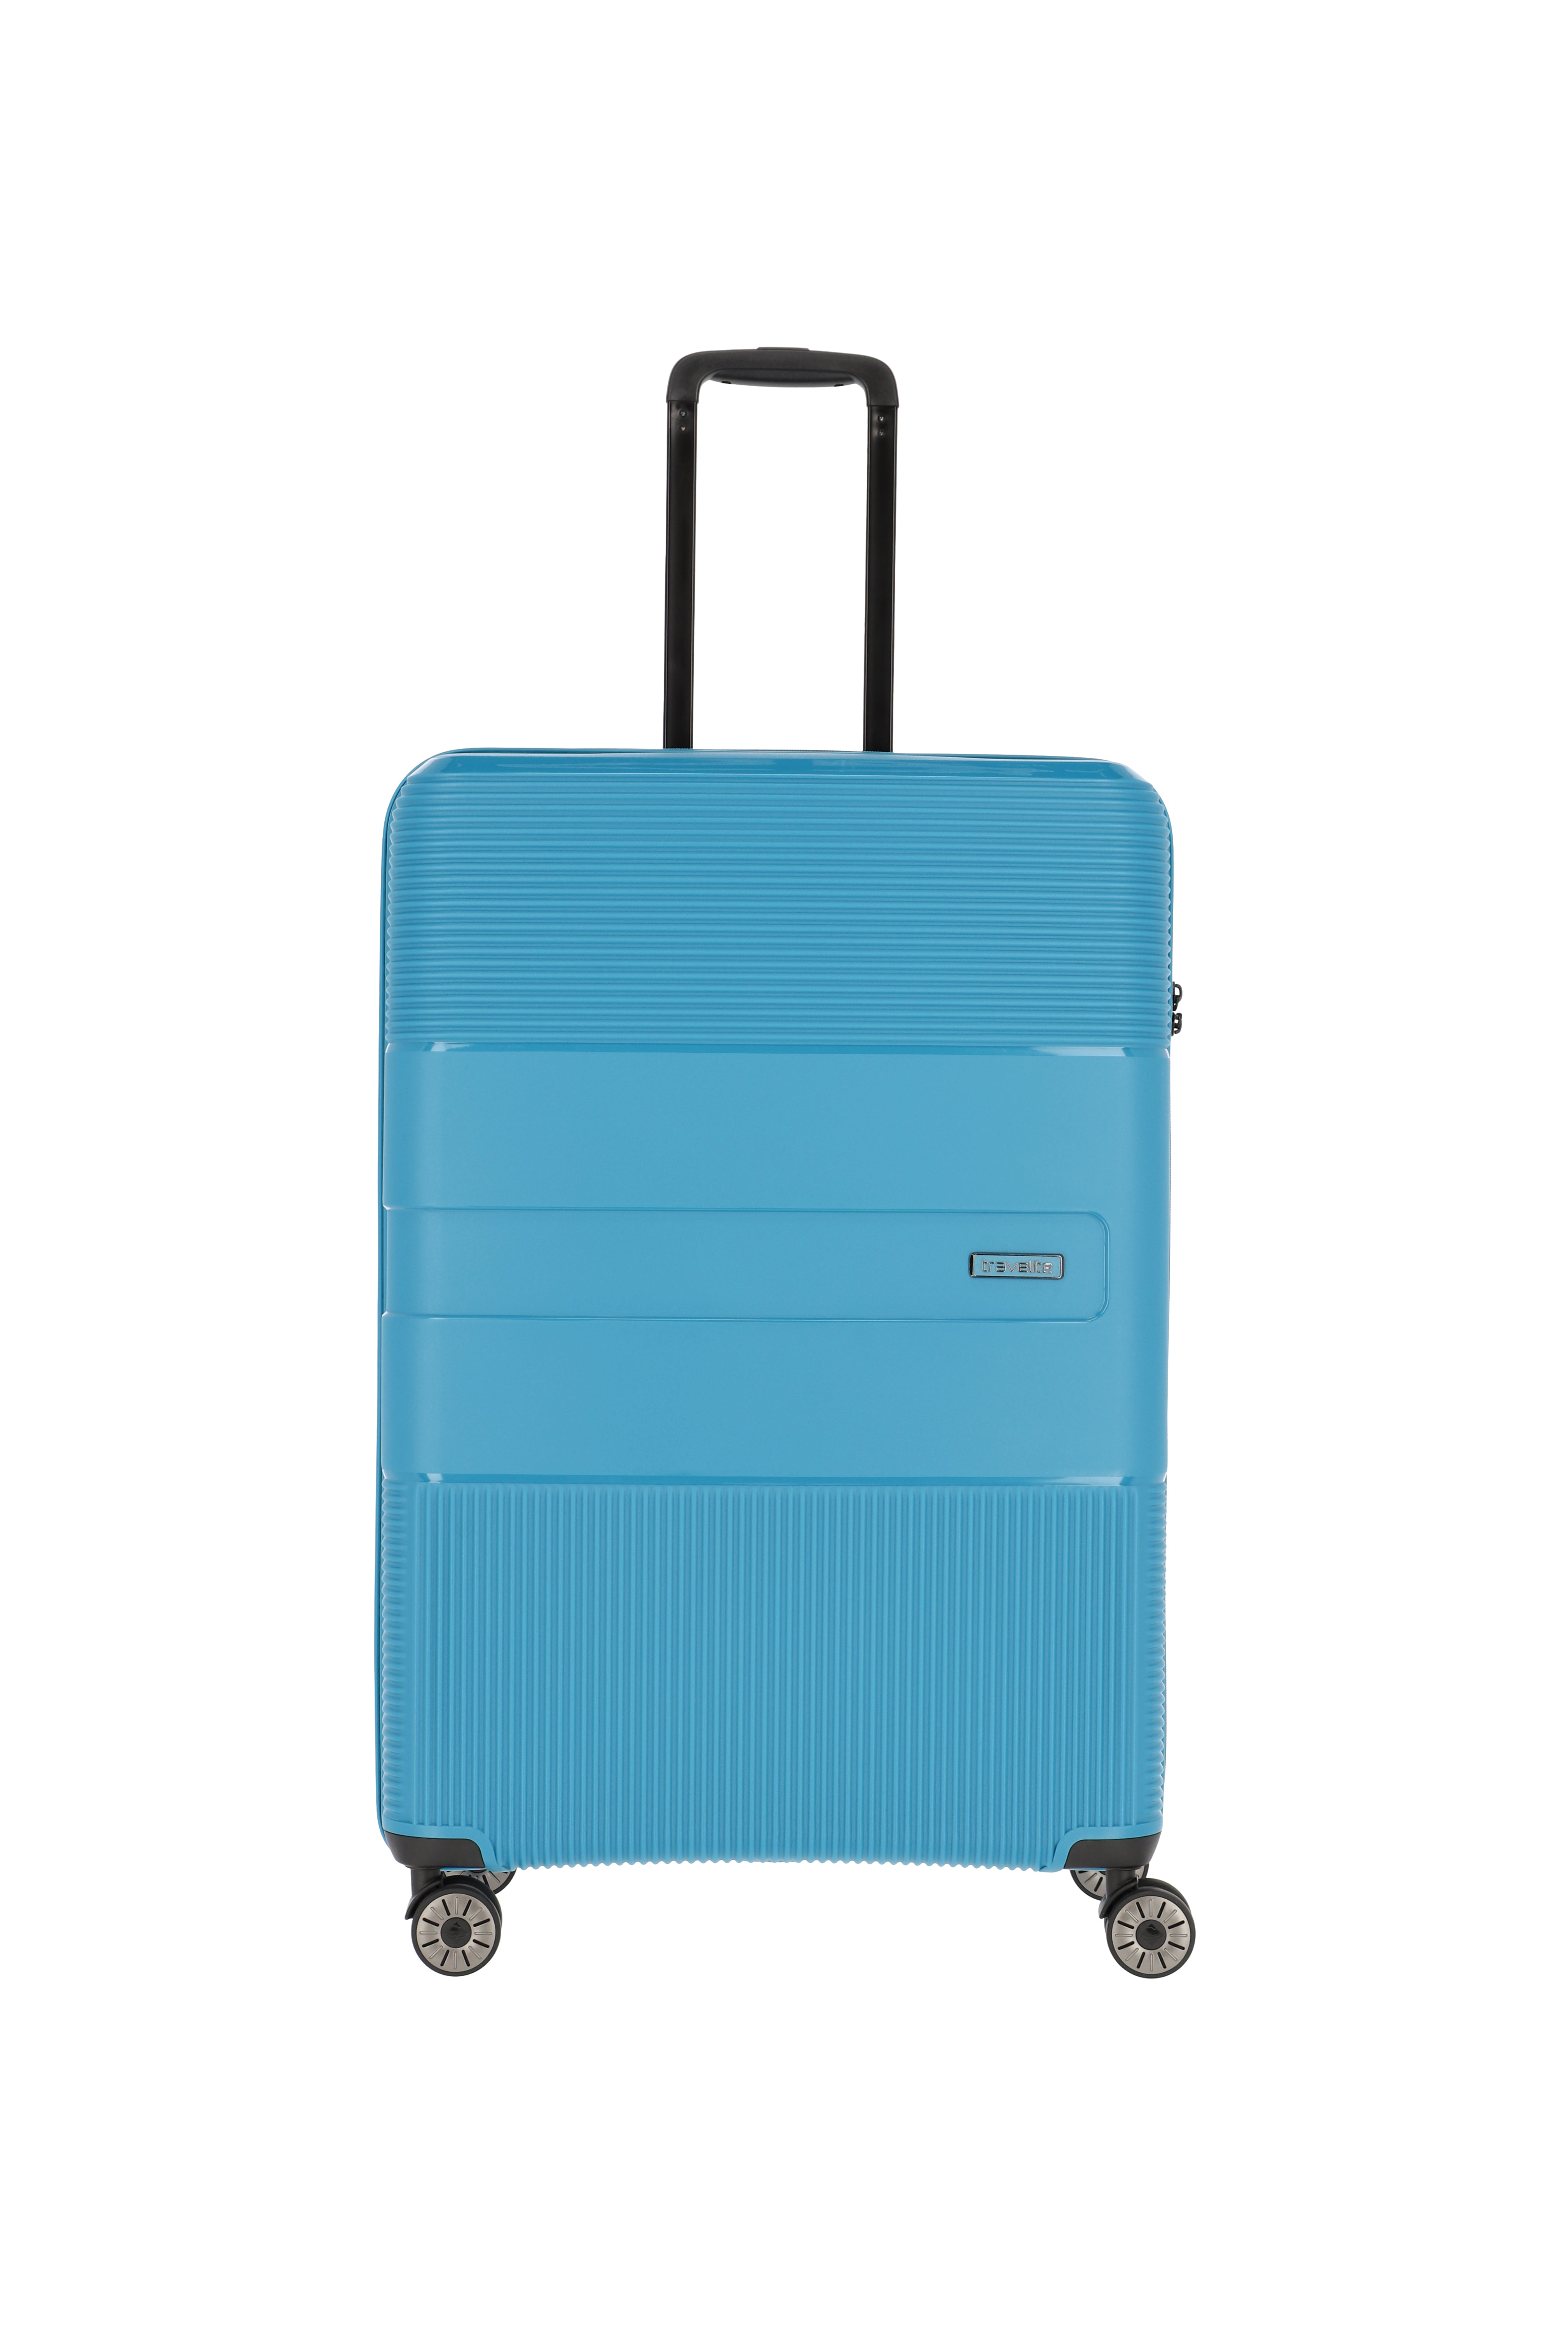 Waal Trolley L turquoise